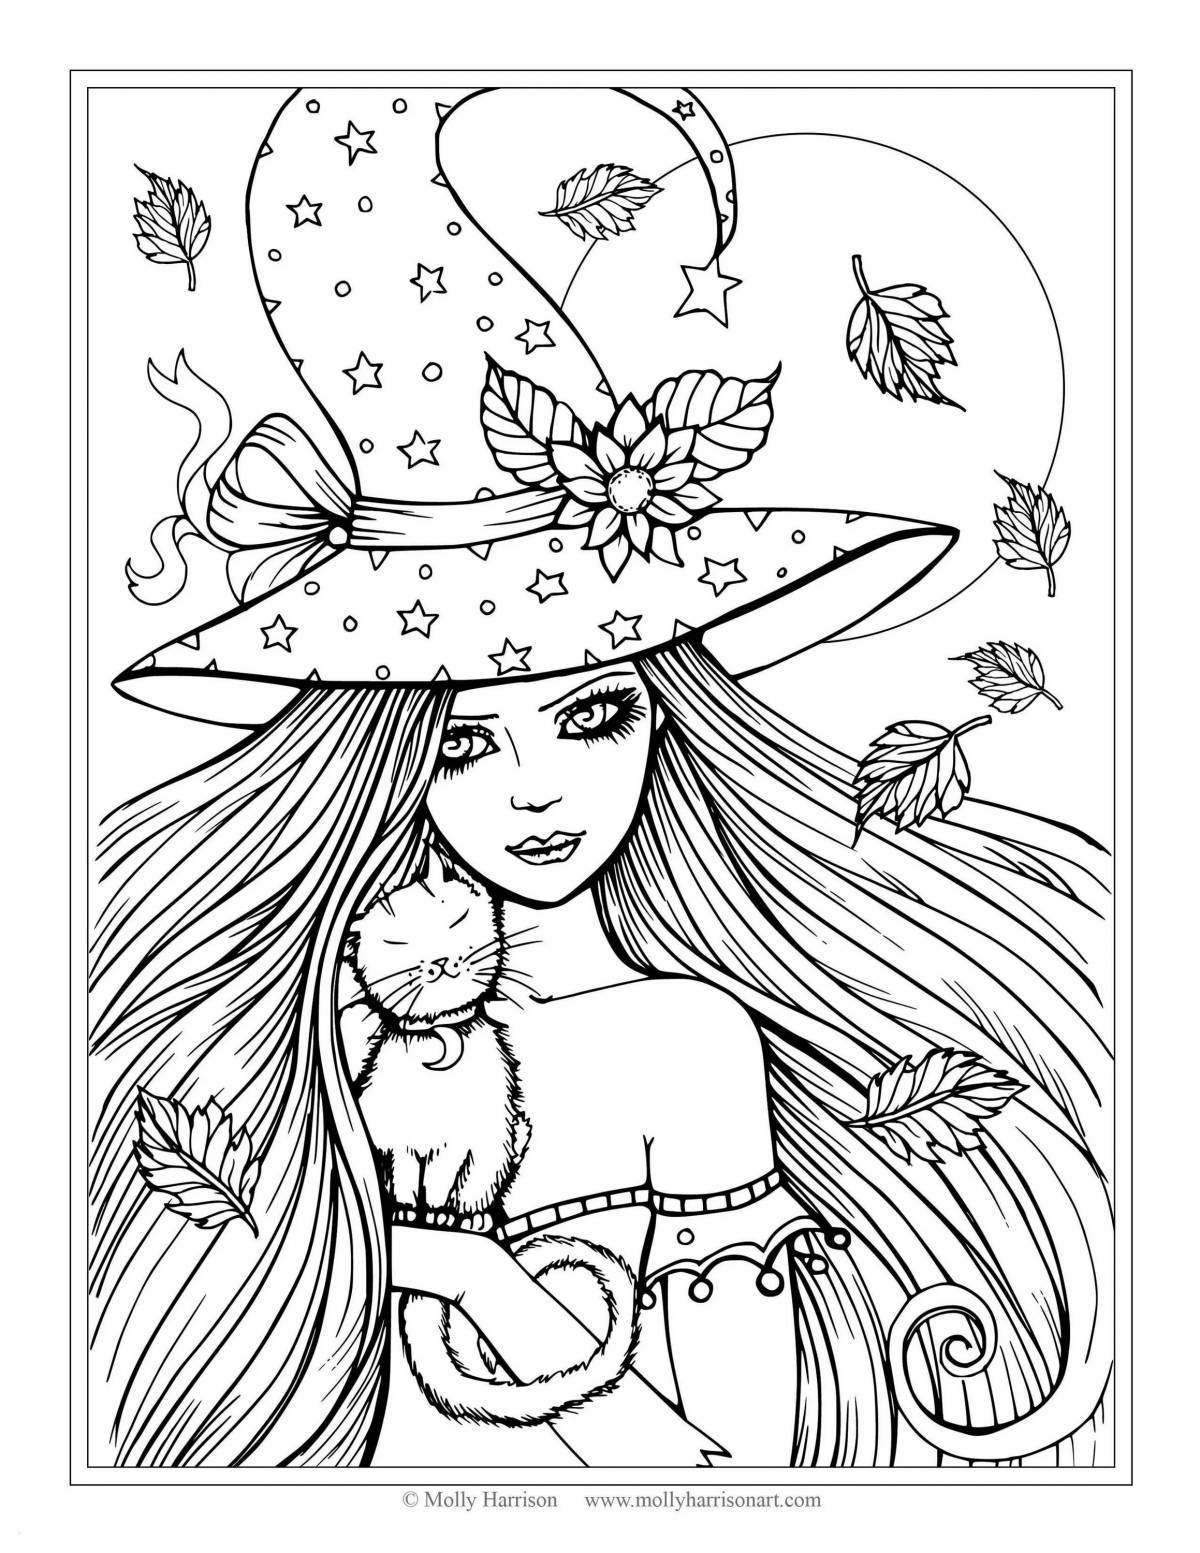 Amazing coloring pages for girls 10-11 years old